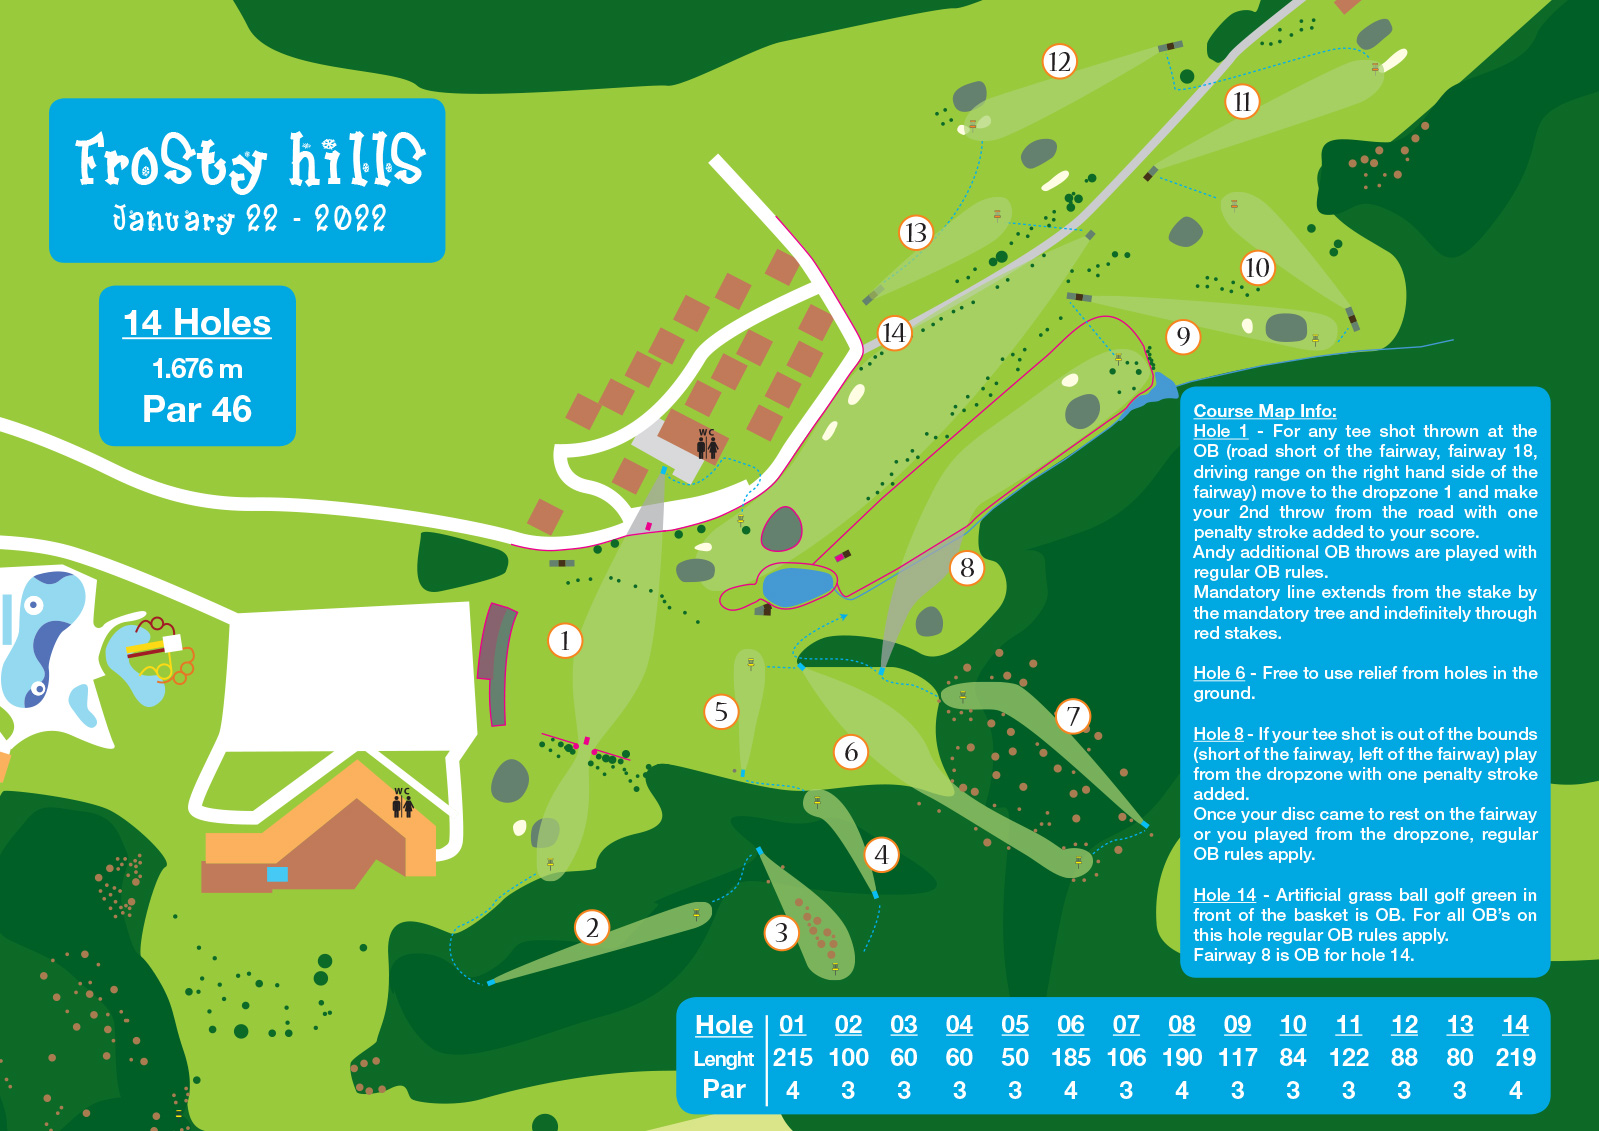 Frosty Hills 2022 course map